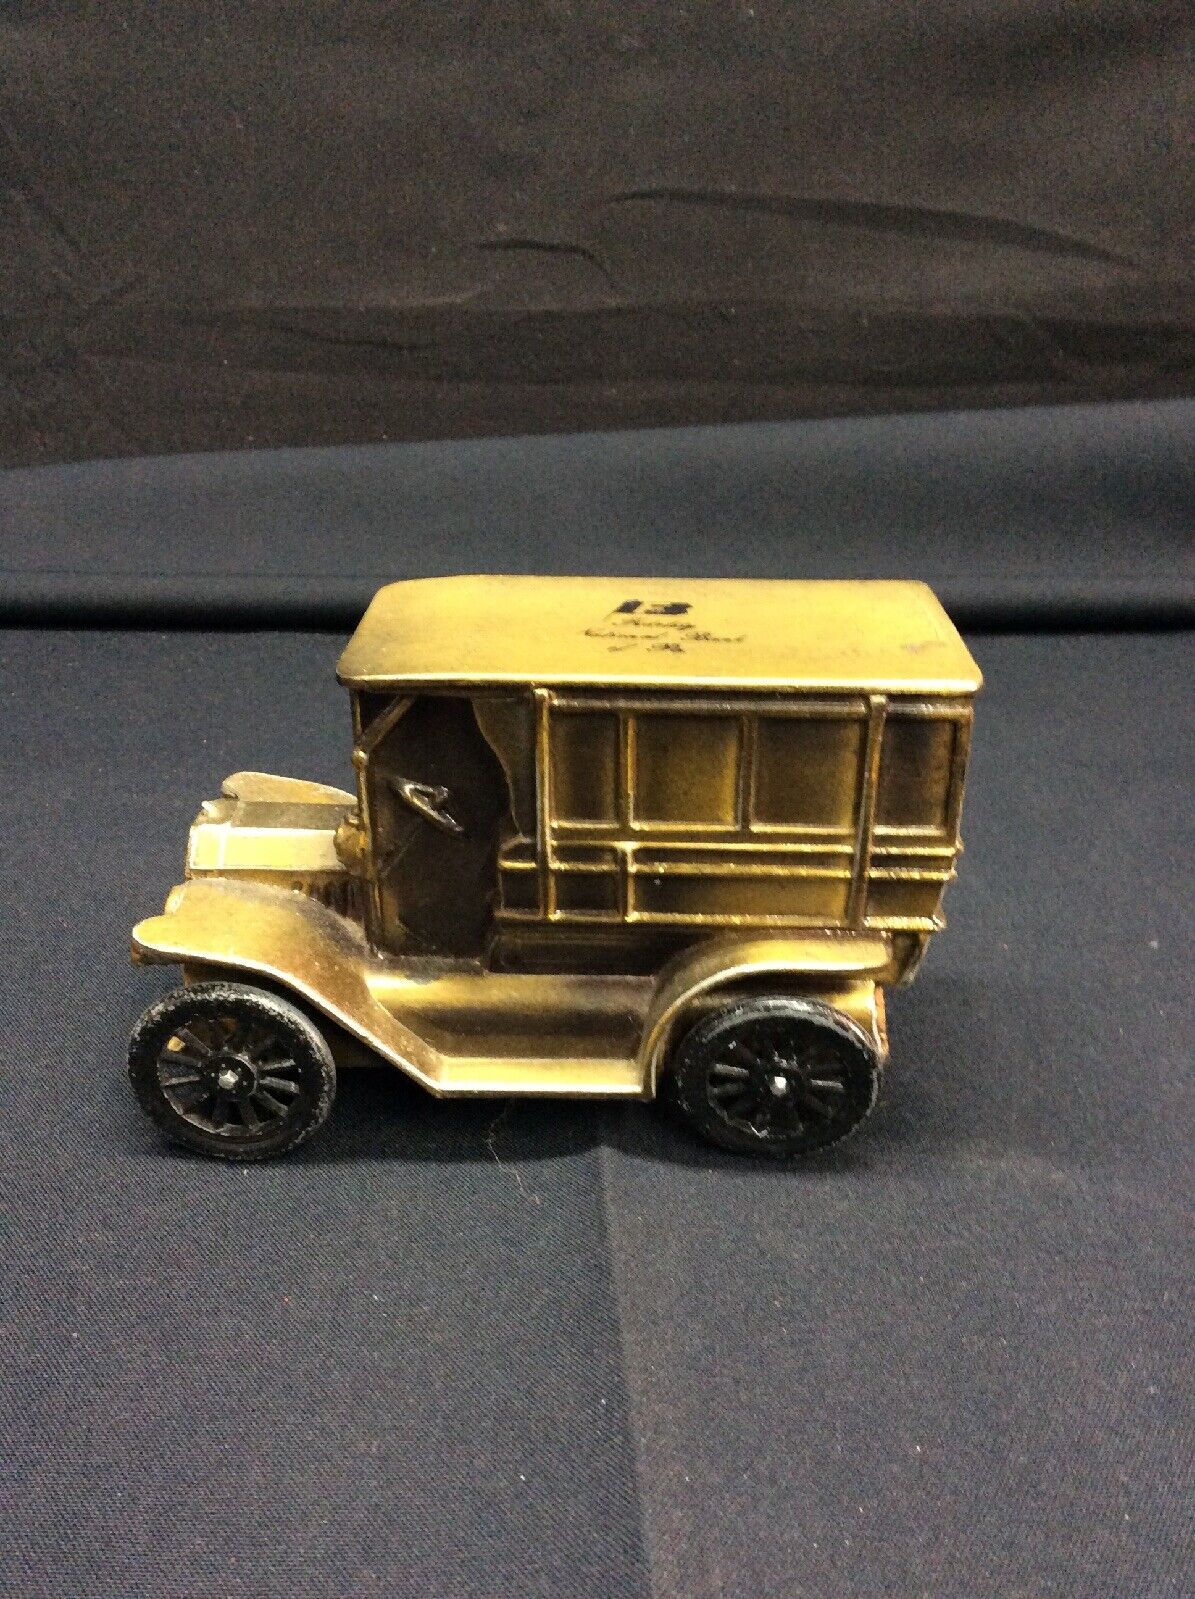   Fidelity National Bank of PA 1915 Ford Coin Bank Advertising Diecast 